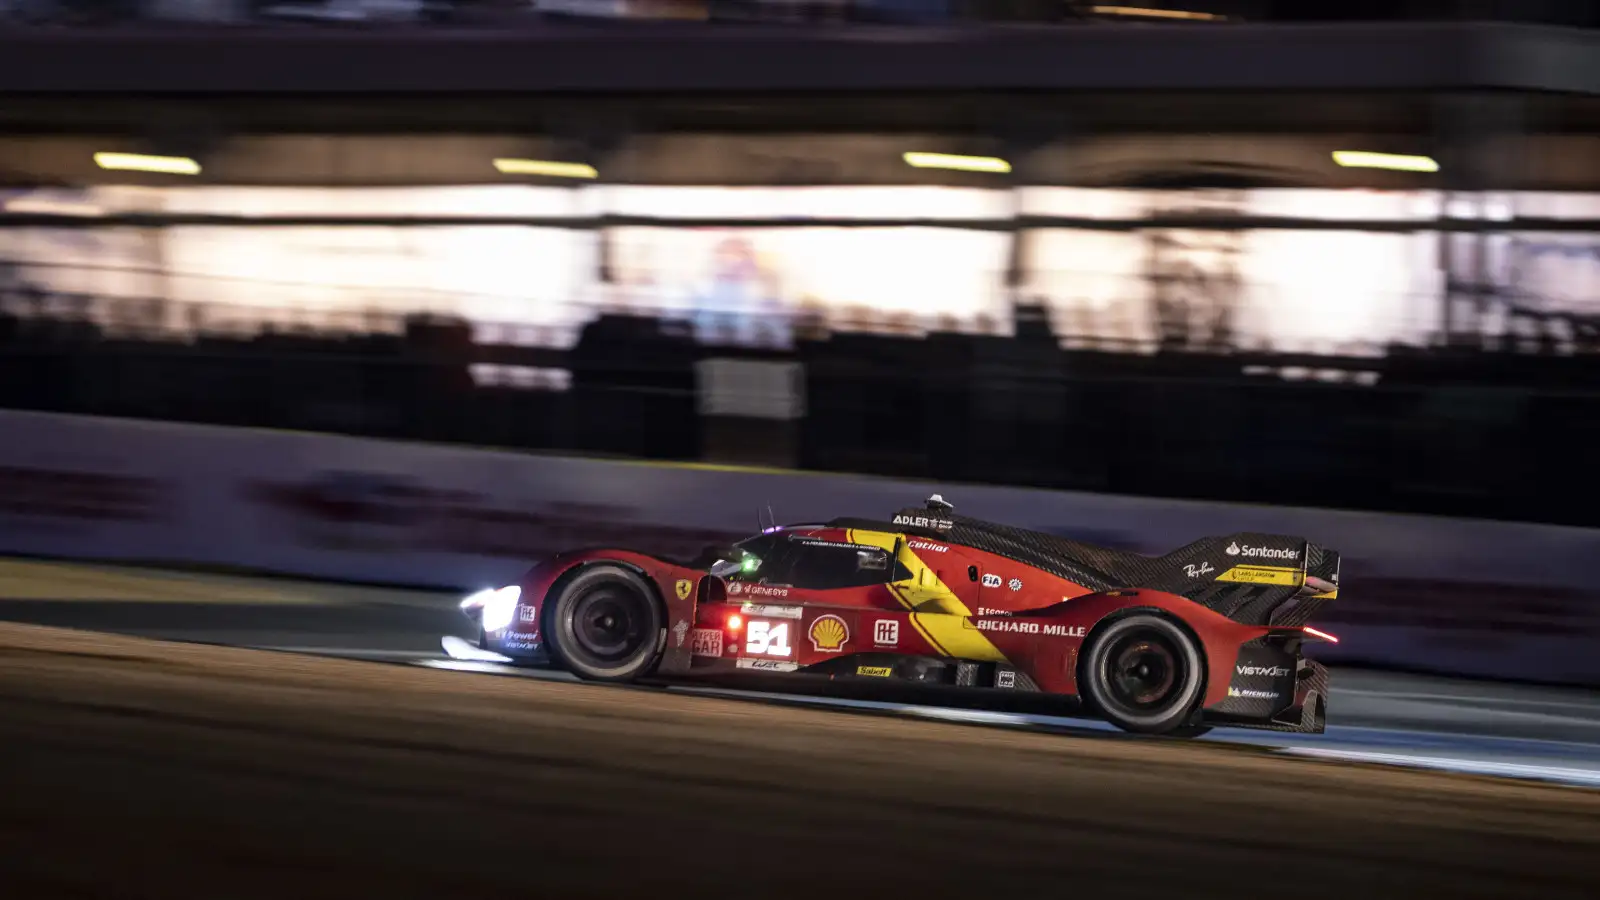 Ferrari's No.51 Hypercar entry at the Le Mans 24 Hours.